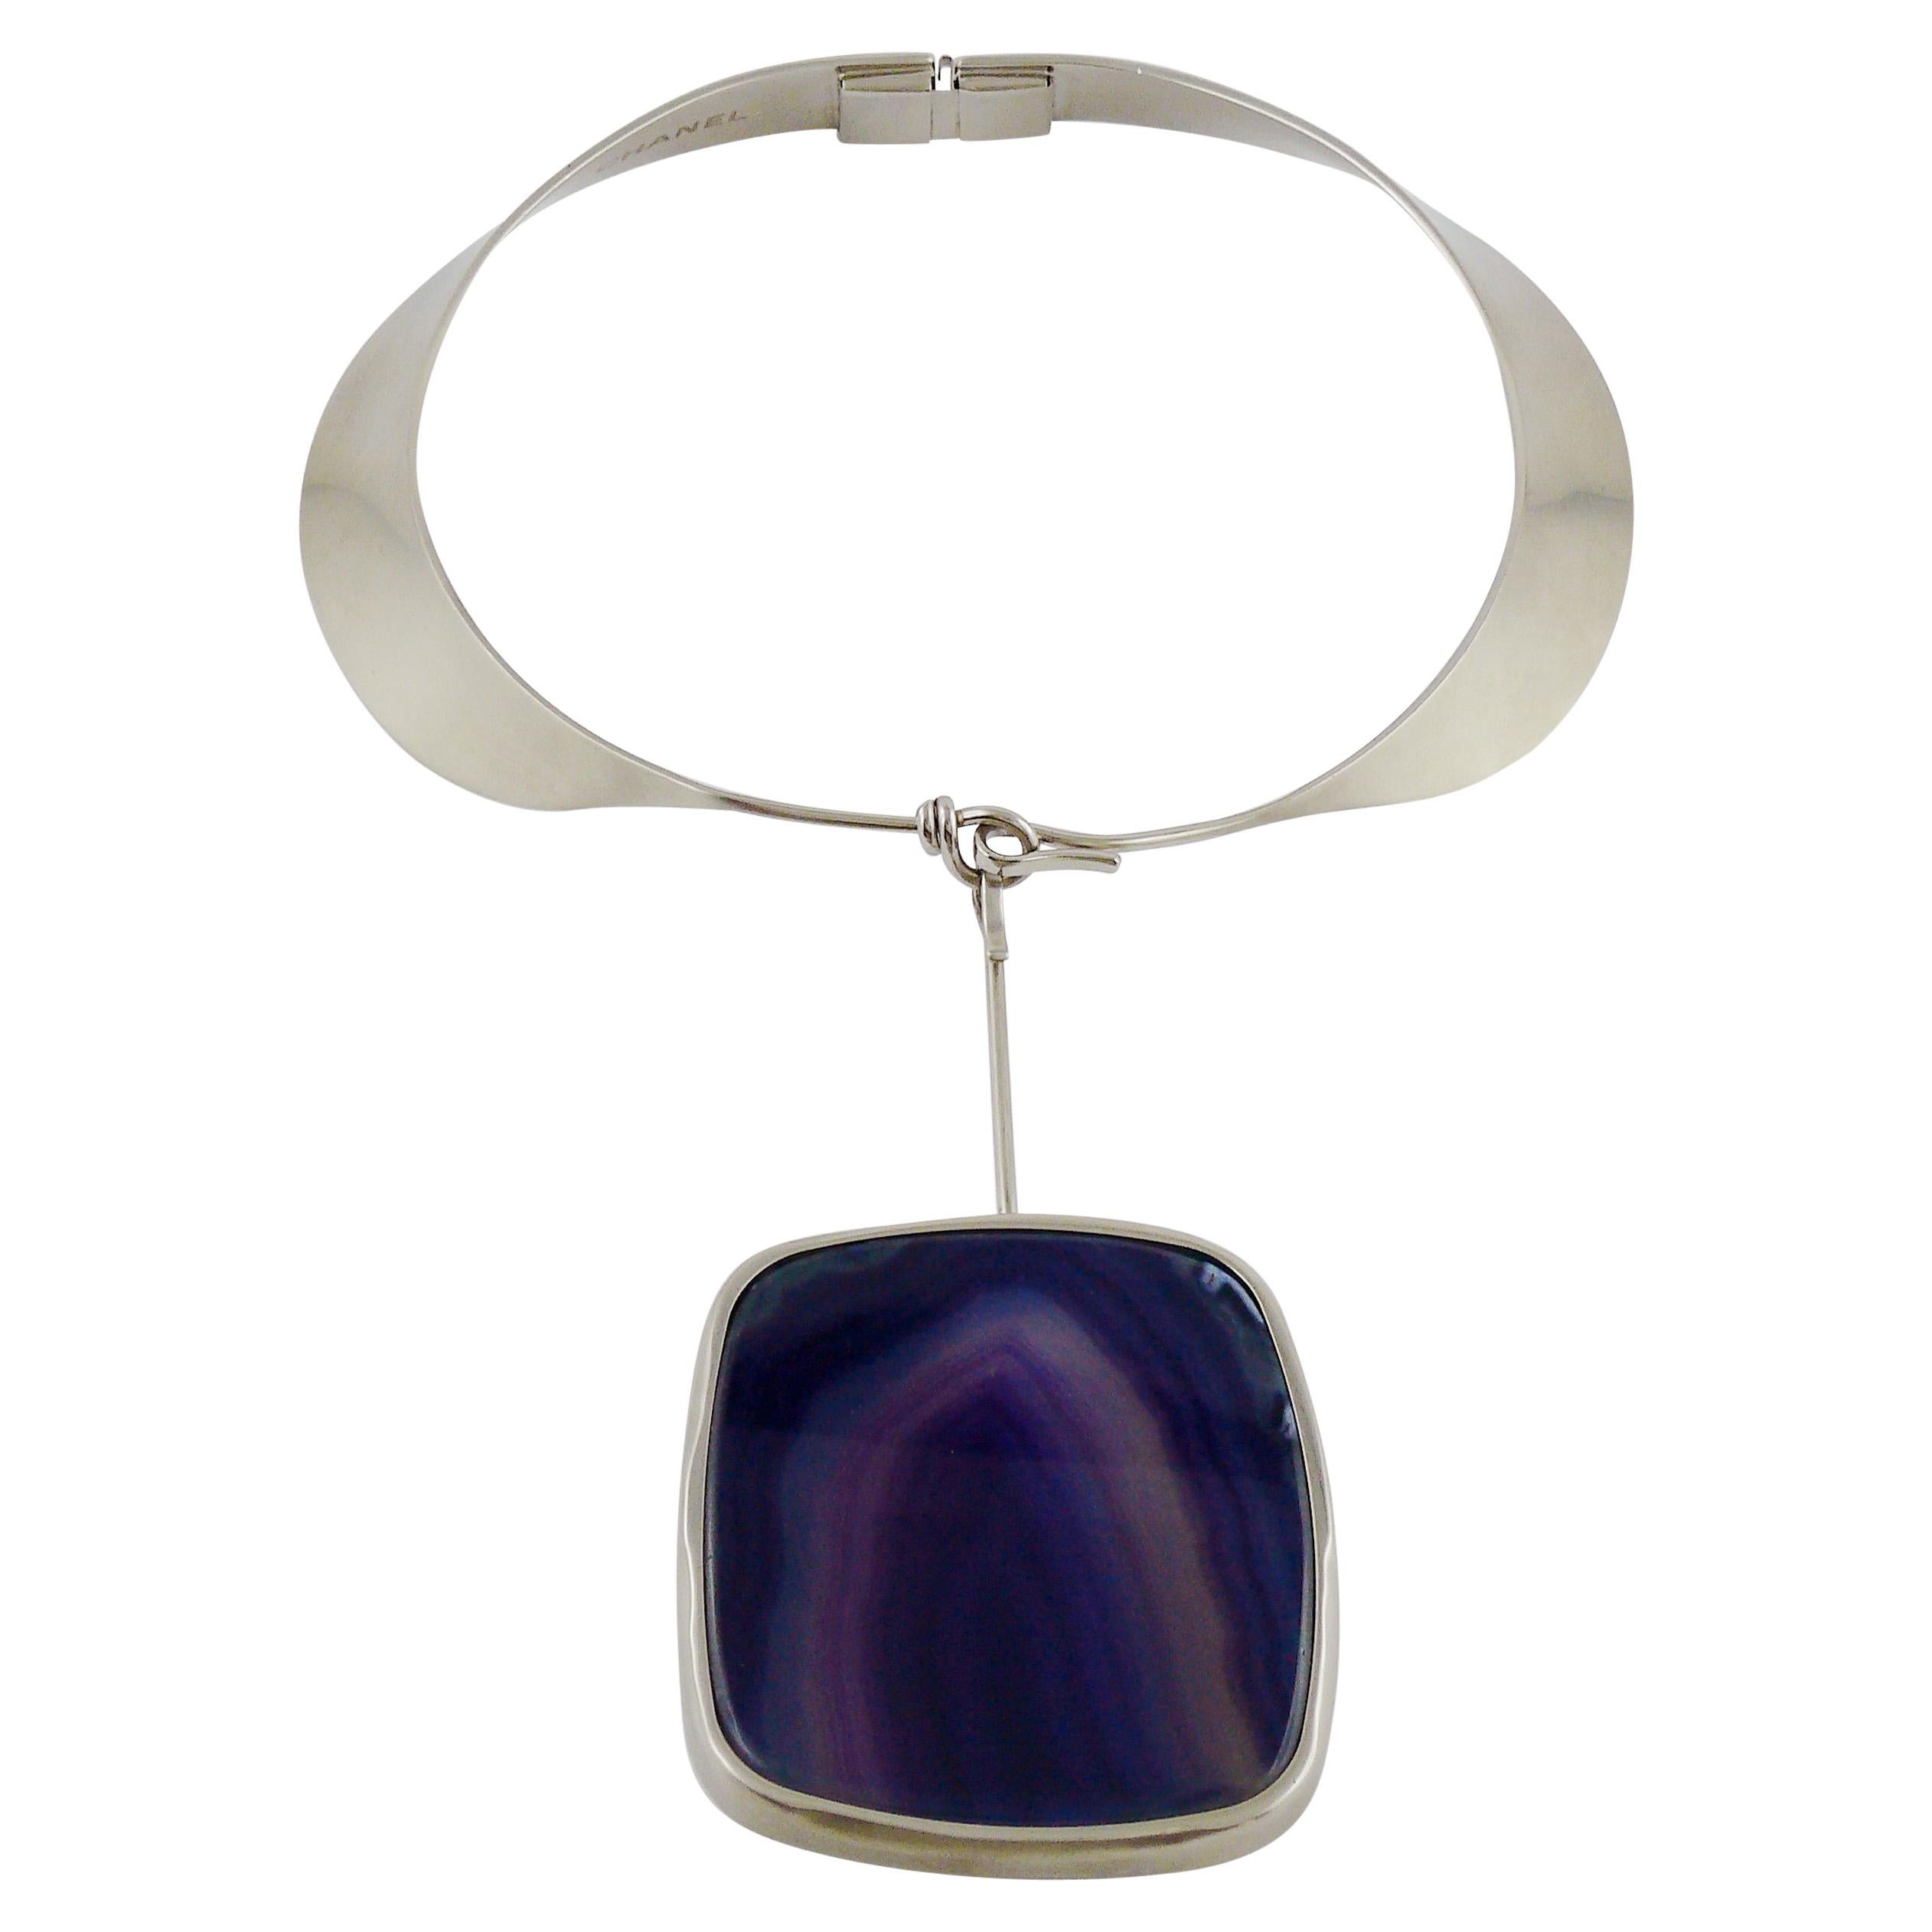 Chanel Modernist Choker Necklace with Agate Pendant